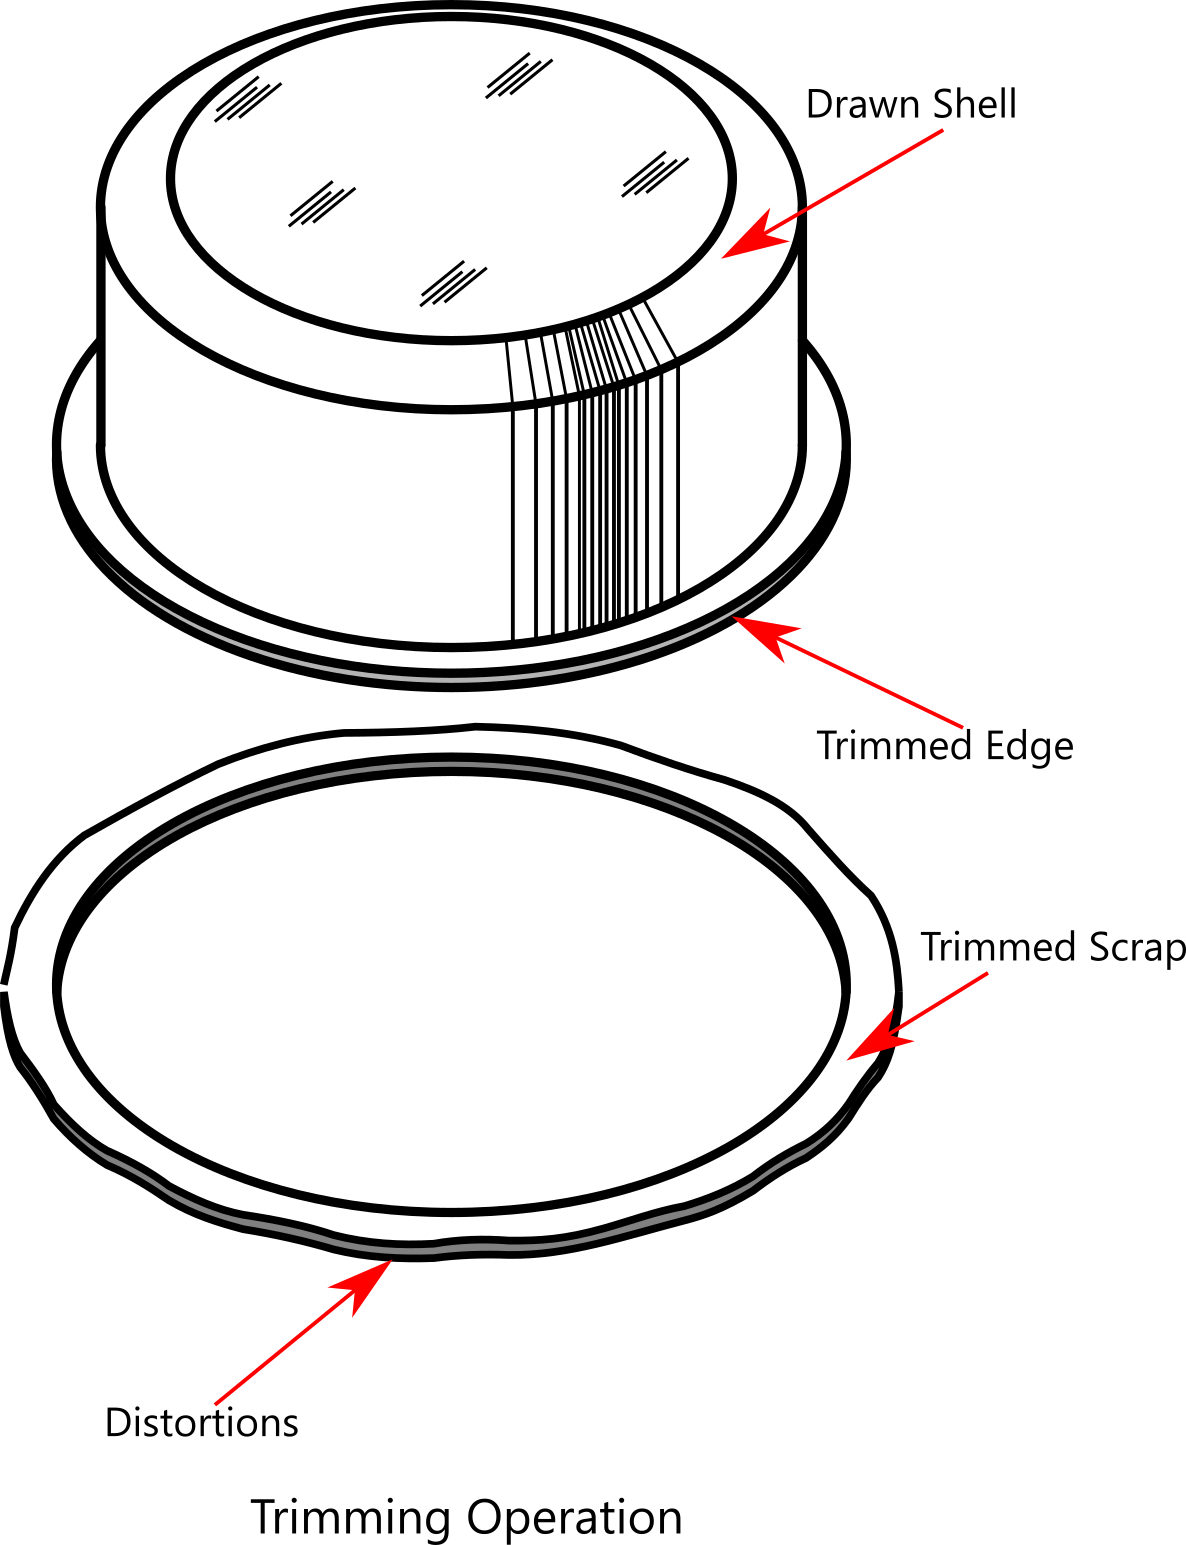 Image showing an example of trimming operation at the flange of a drawn sheet metal stamping 